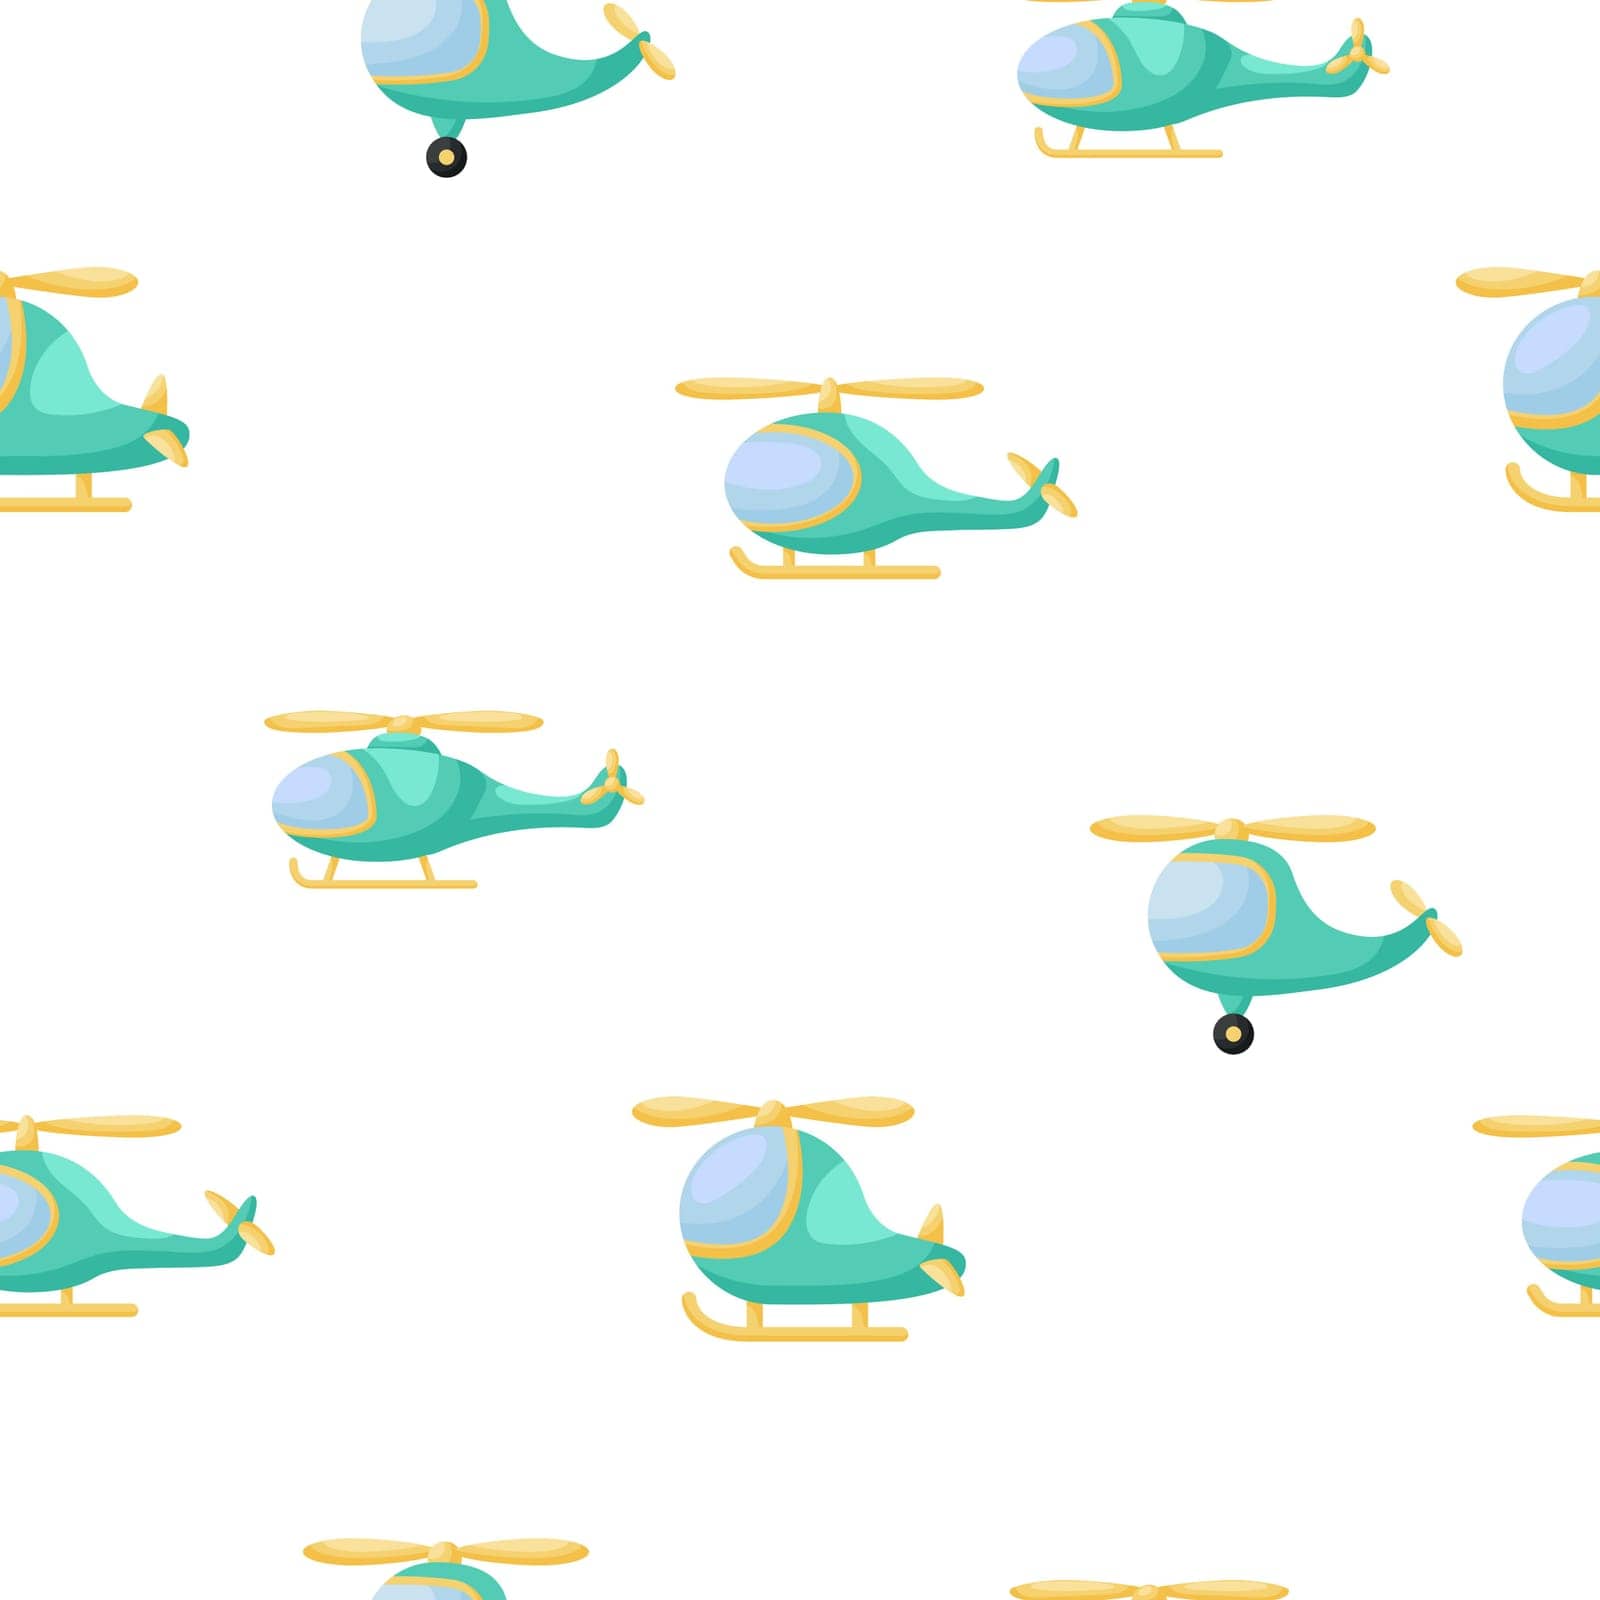 Cute children's seamless pattern with green hellicopters. Creative kids texture for fabric, wrapping, textile, wallpaper, apparel. Vector illustration.